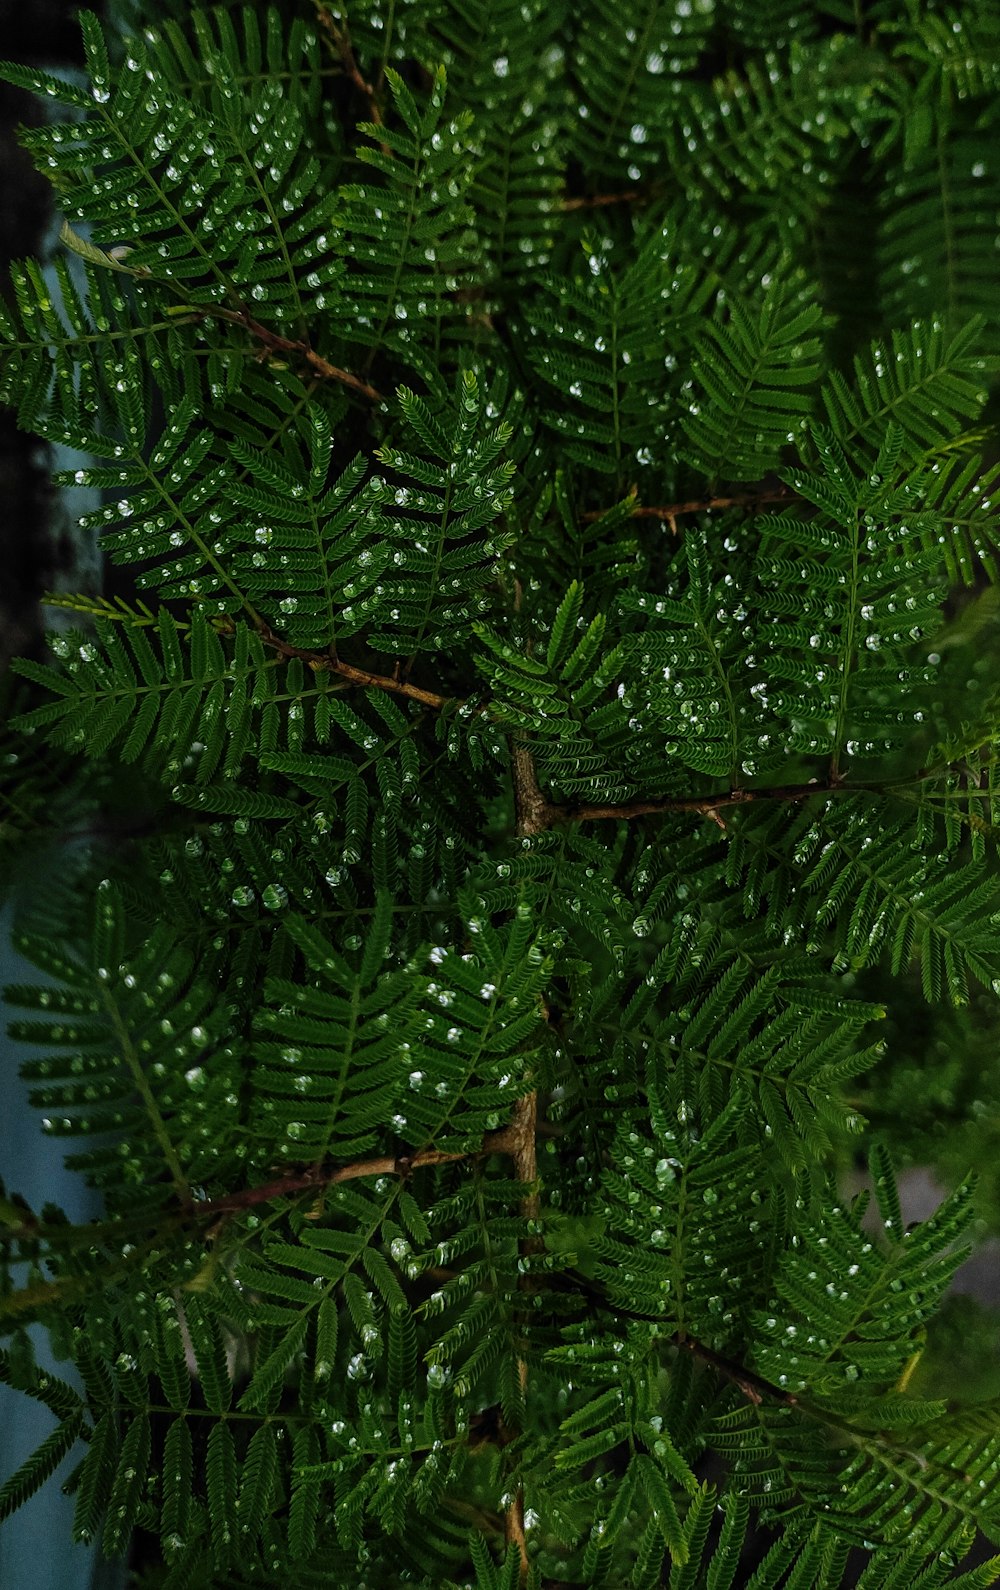 a close up of a tree with water droplets on it